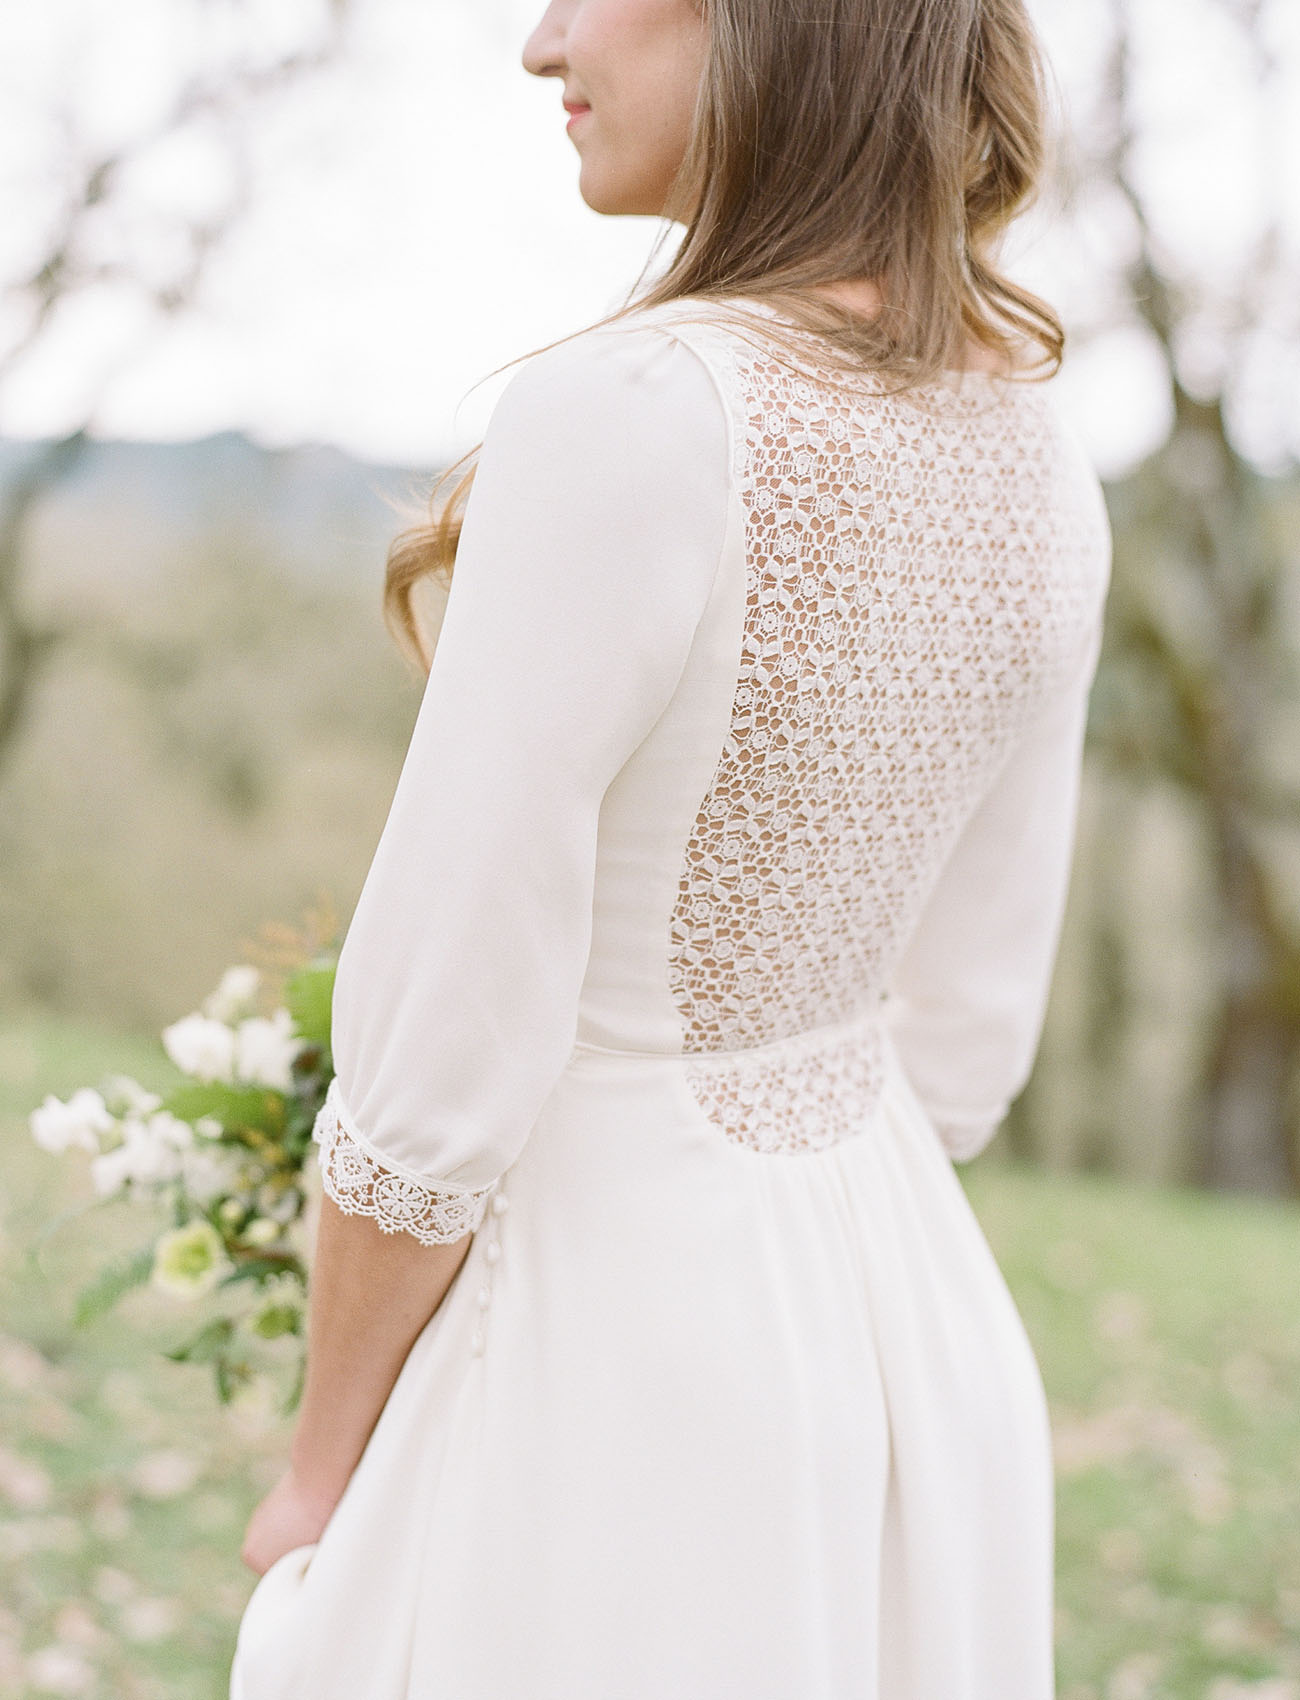 a plain wedding dress with a highlighted waist, long sleeves, a lace back and a lace trim on the sleeves for a romantic touch